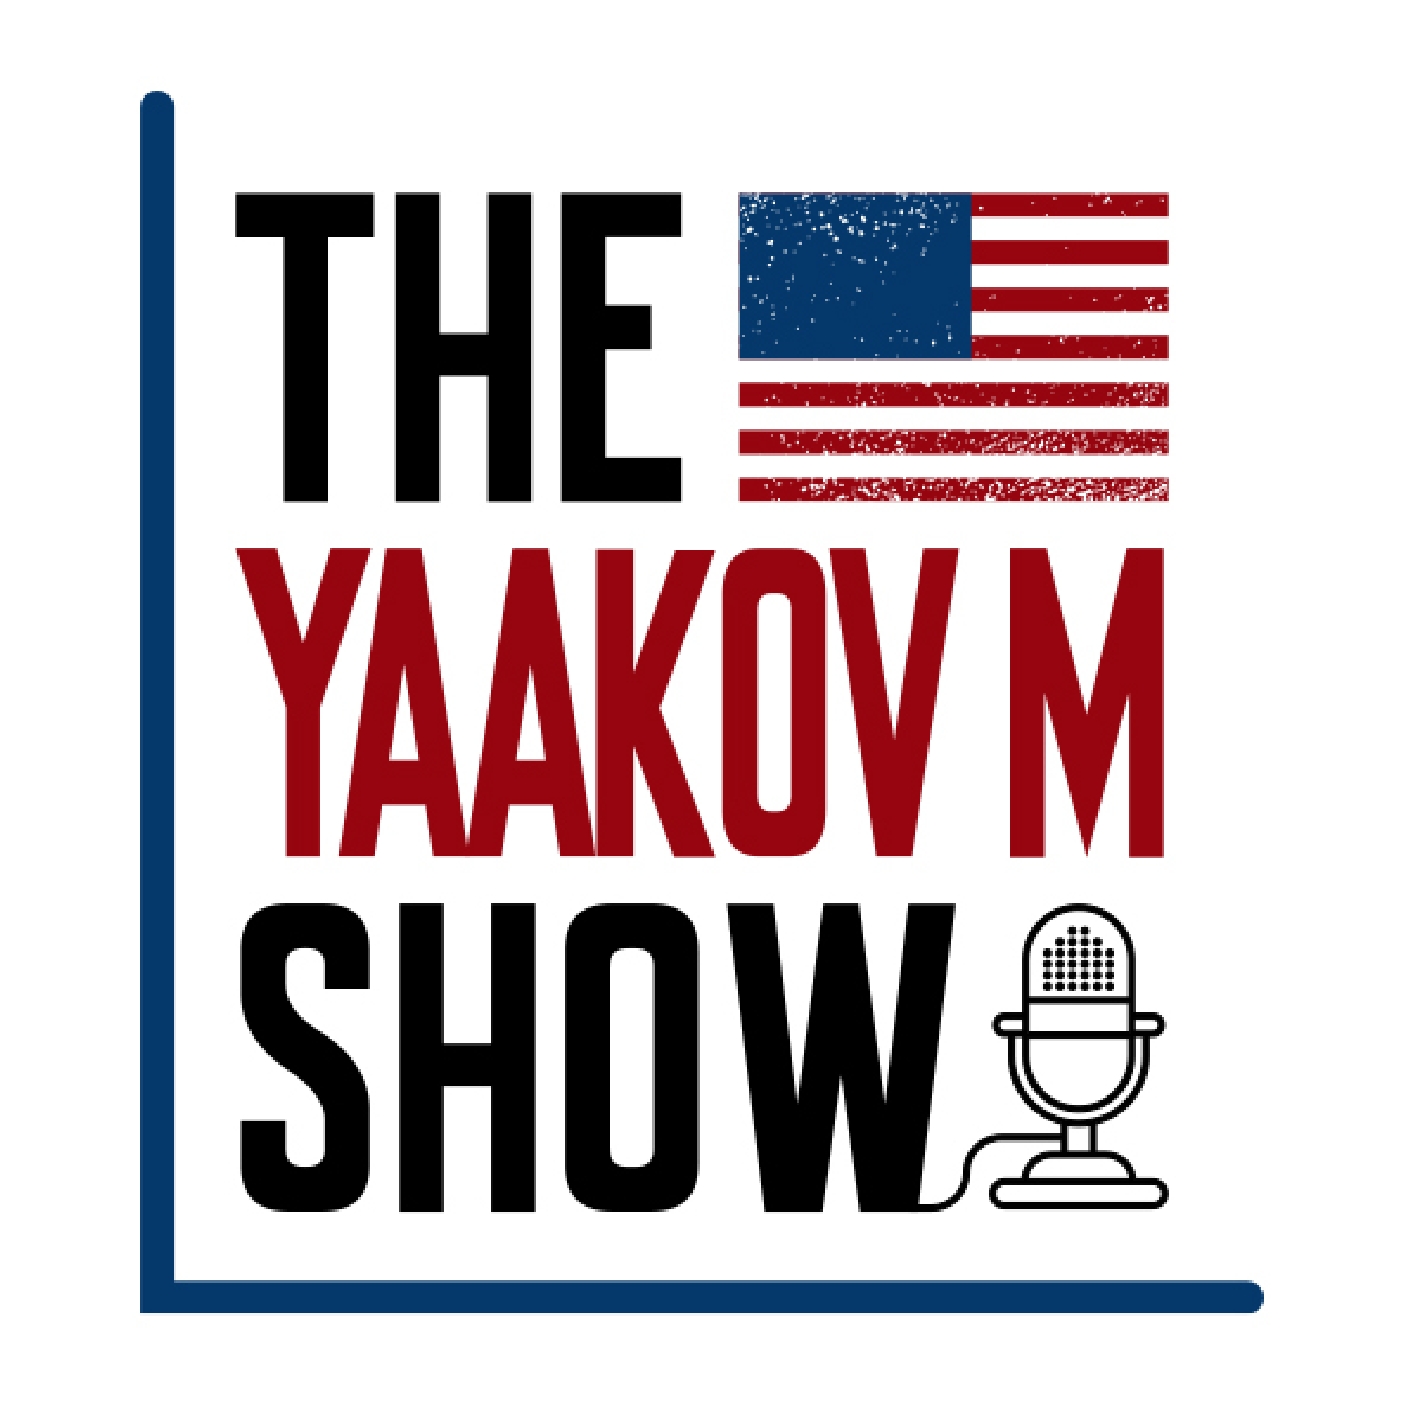 Political Analyst Moshe Hill discusses Biden, Zeldin, Recession, AOC, the “Fist-bump” and much more